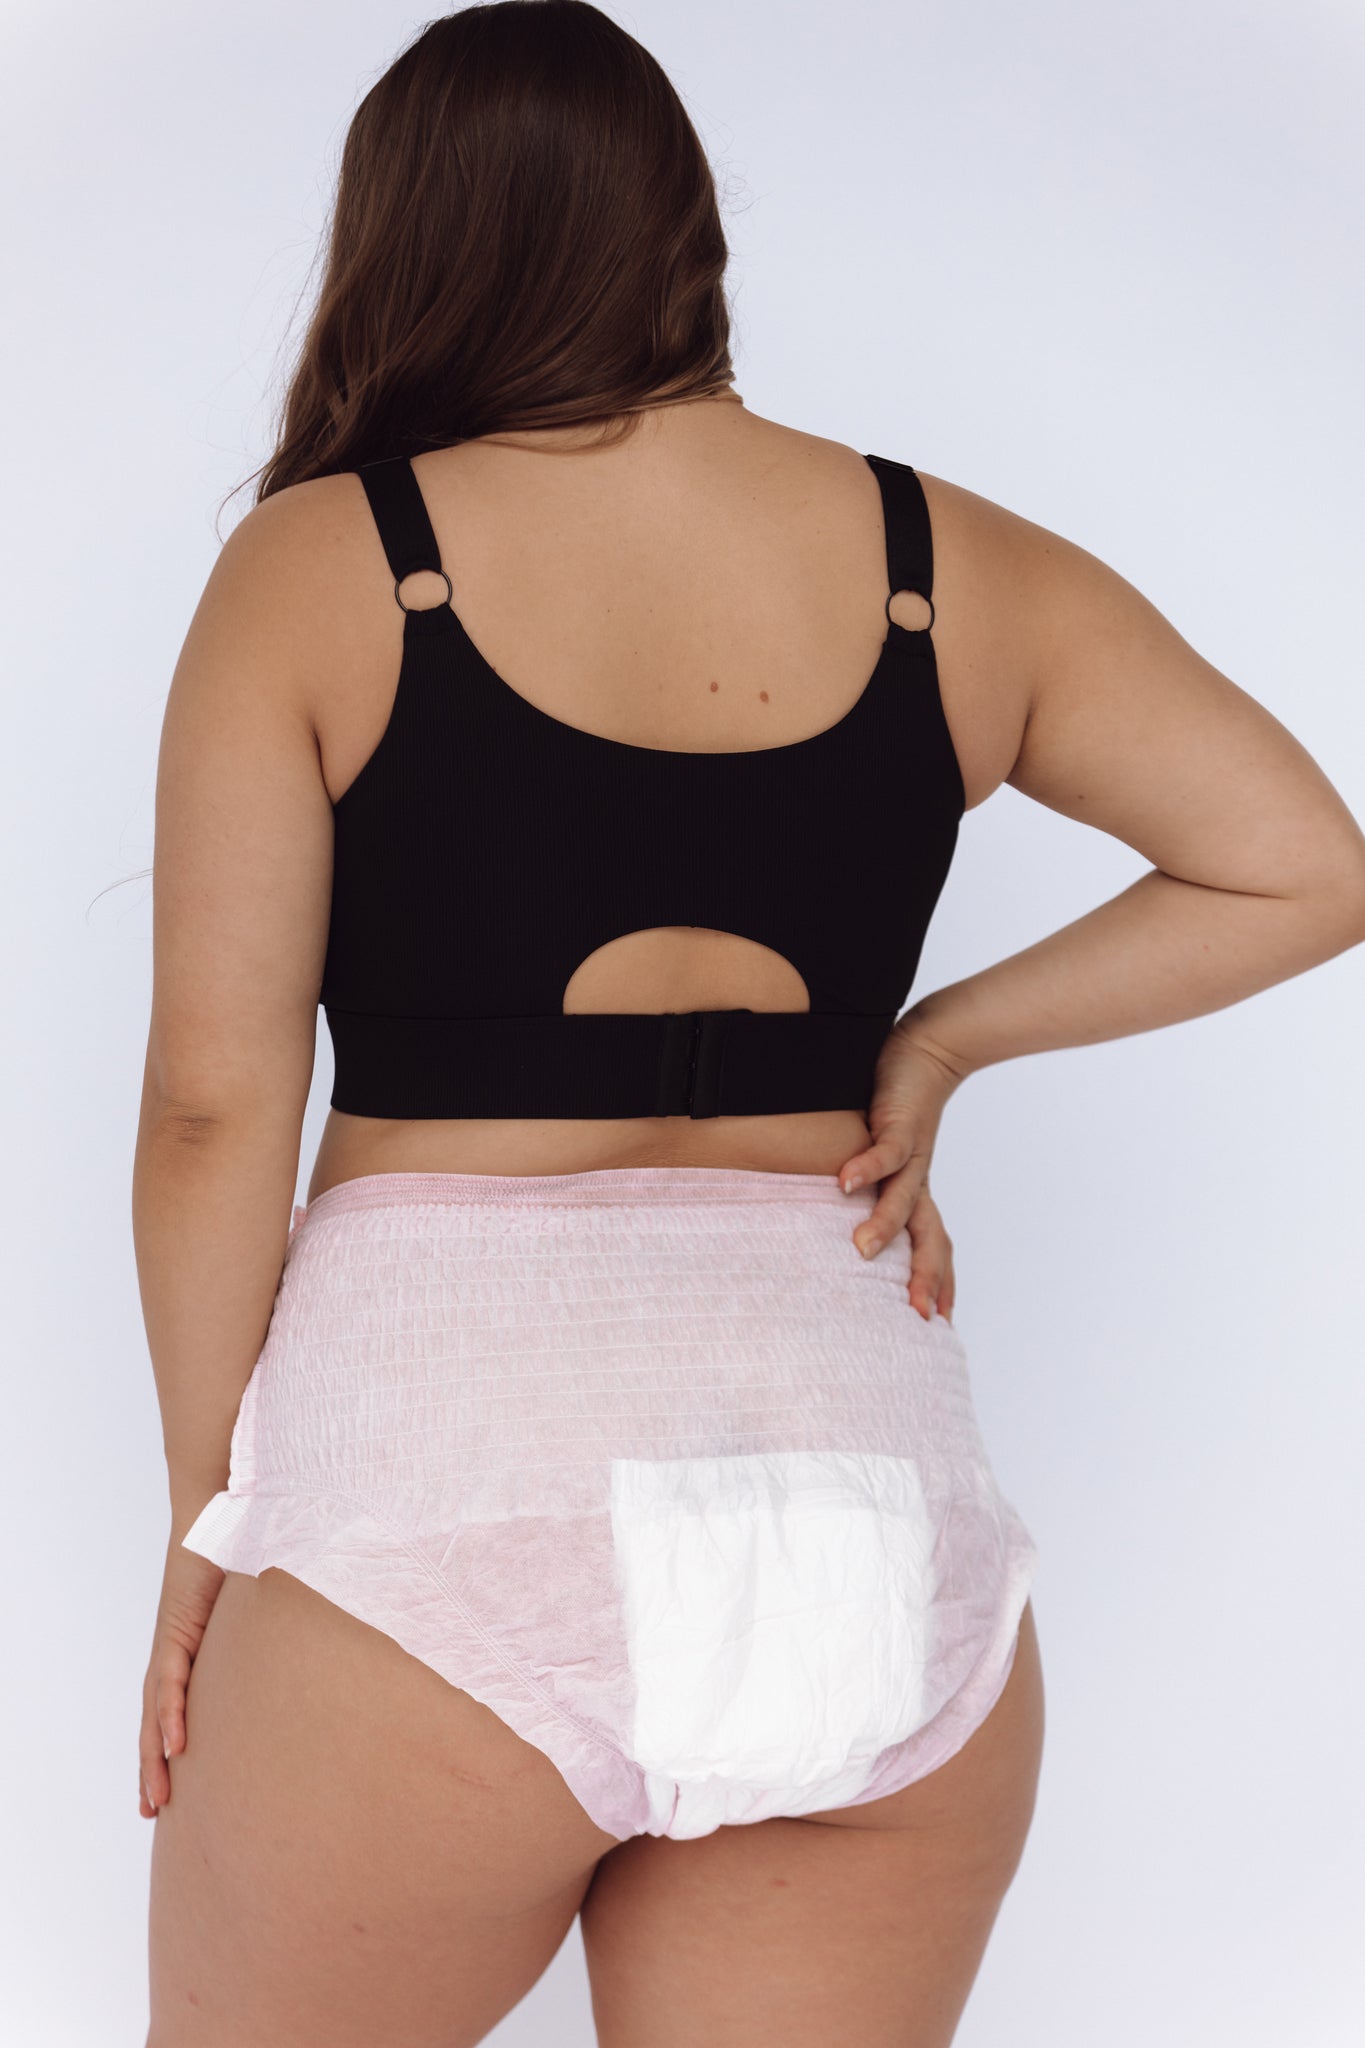 Partum Panties -  2 x packs of Disposable Postpartum Underwear High Waisted, Soft & Absorbent - Large